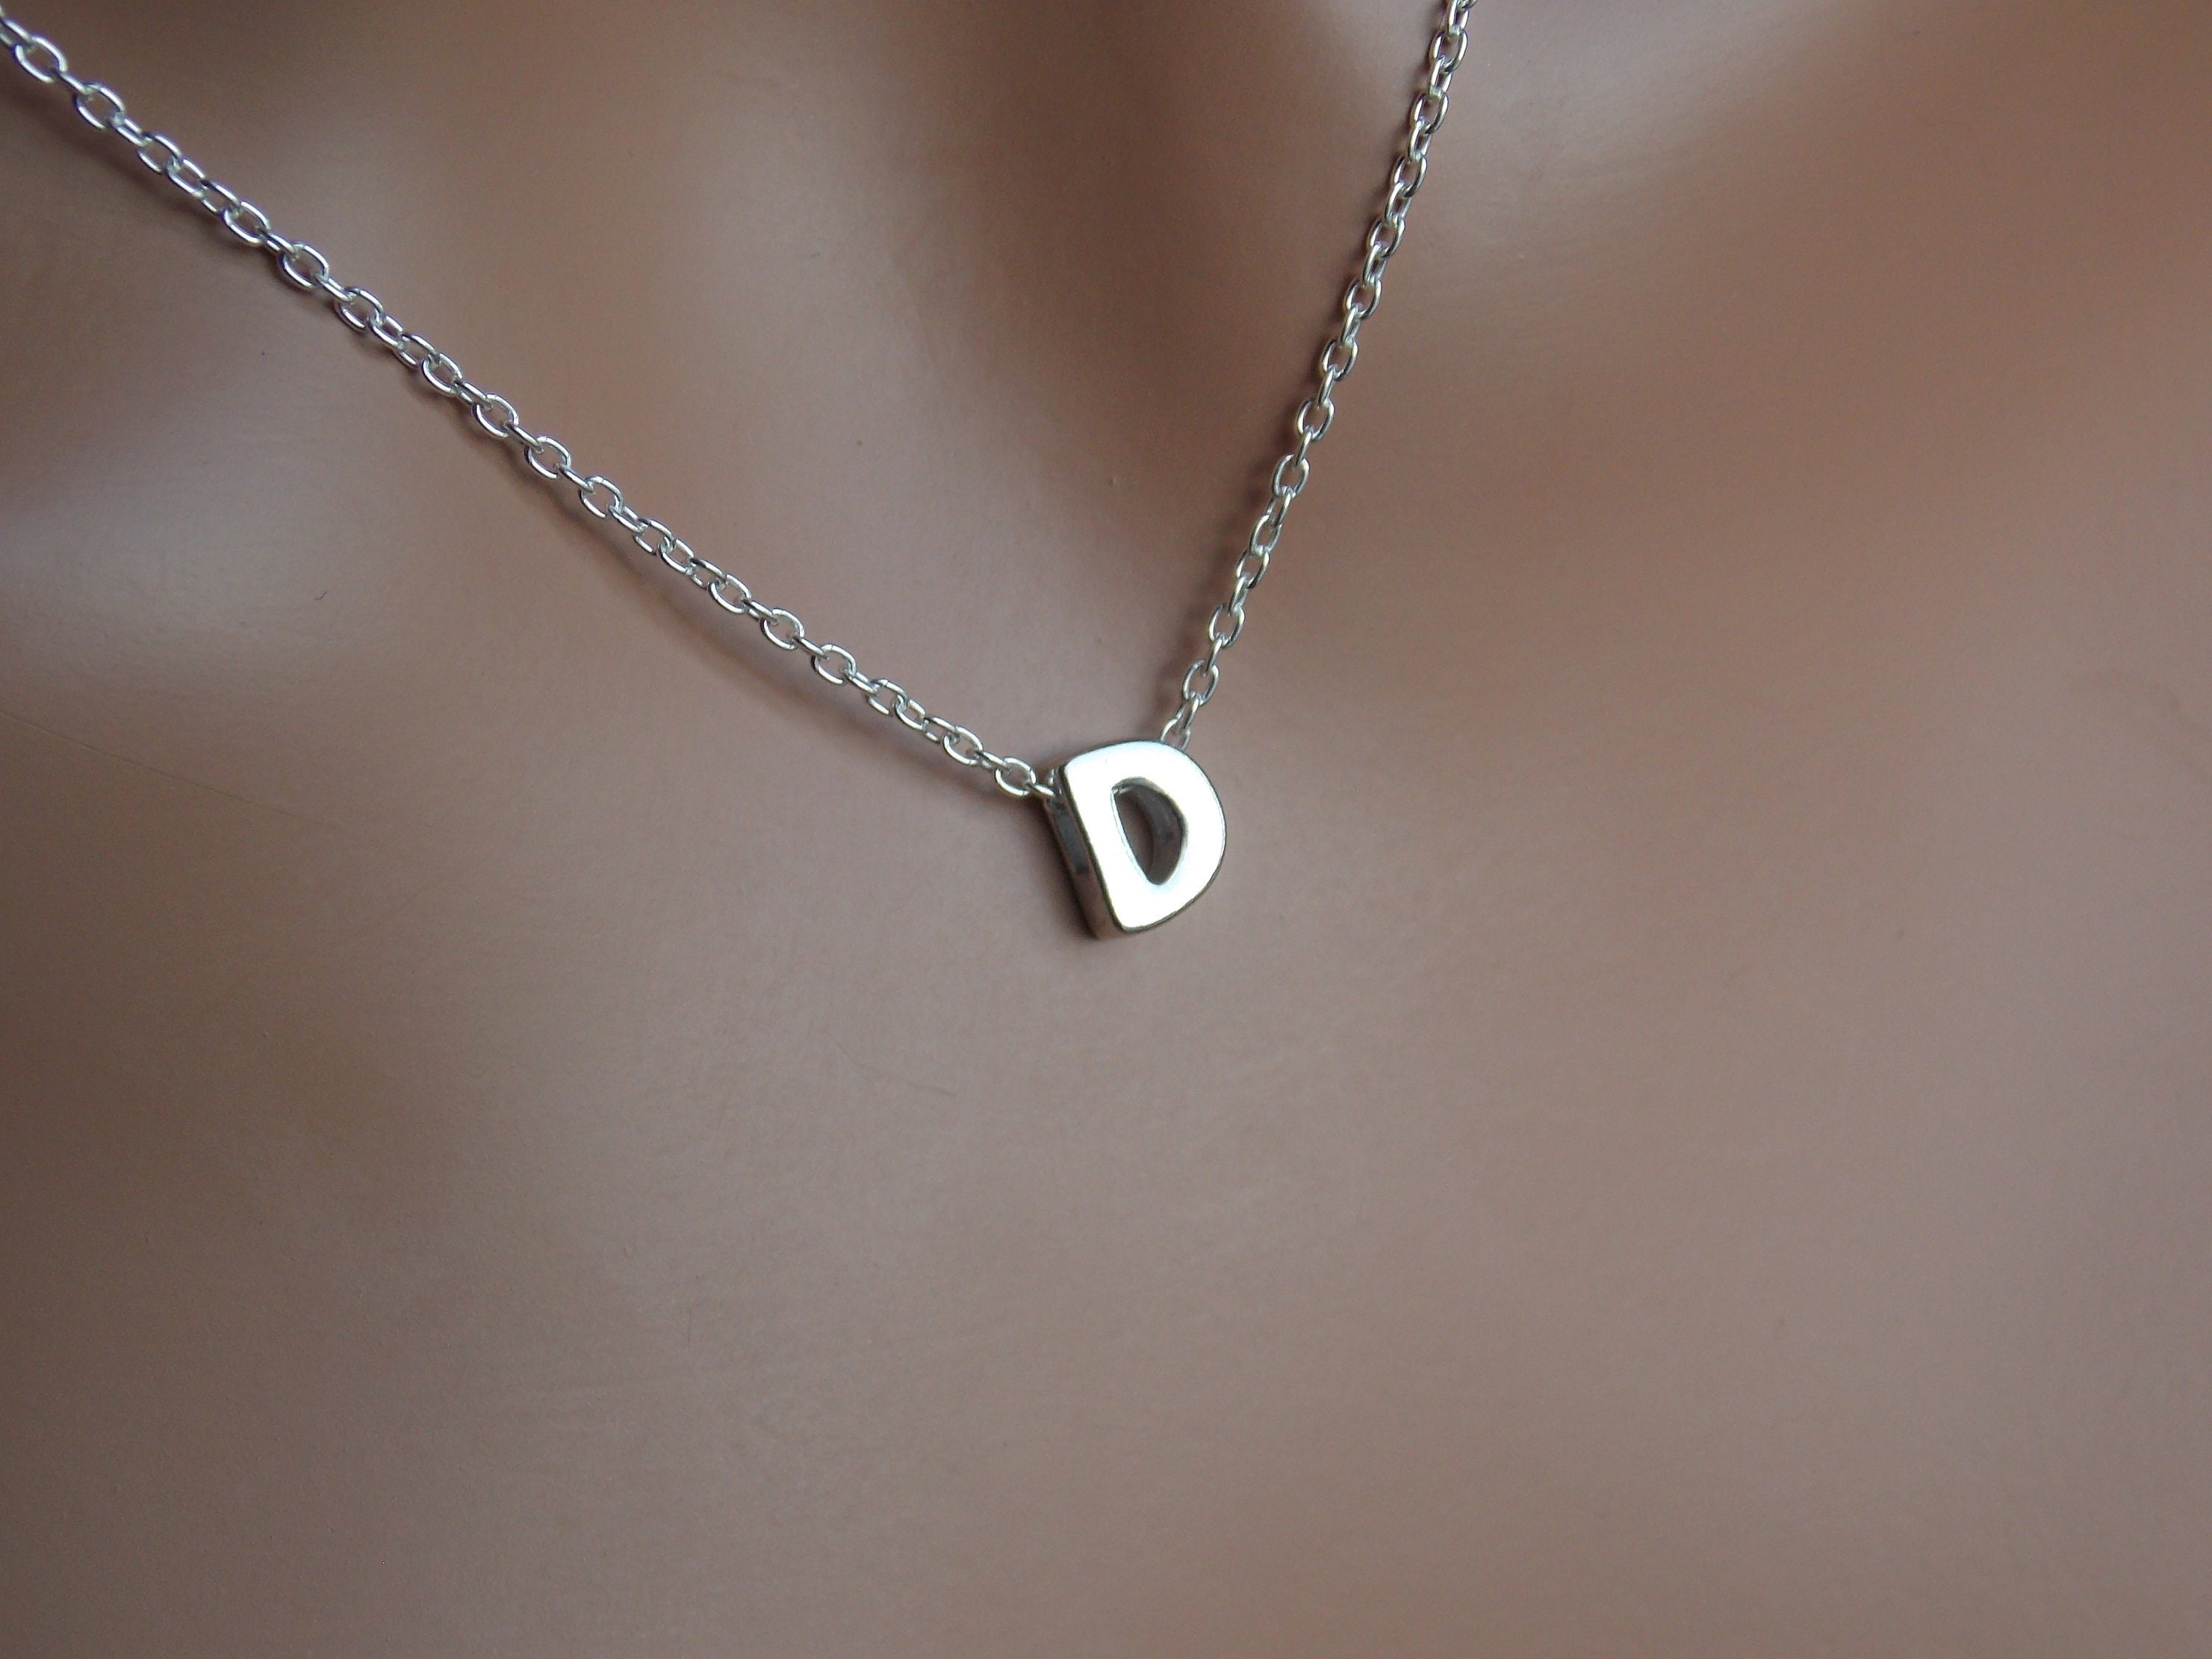 Gift for Her Clear Rhinestone Letter D Rhinestone Letter D Necklace Black Enamel Necklace Initial D Necklace Personalized Necklace